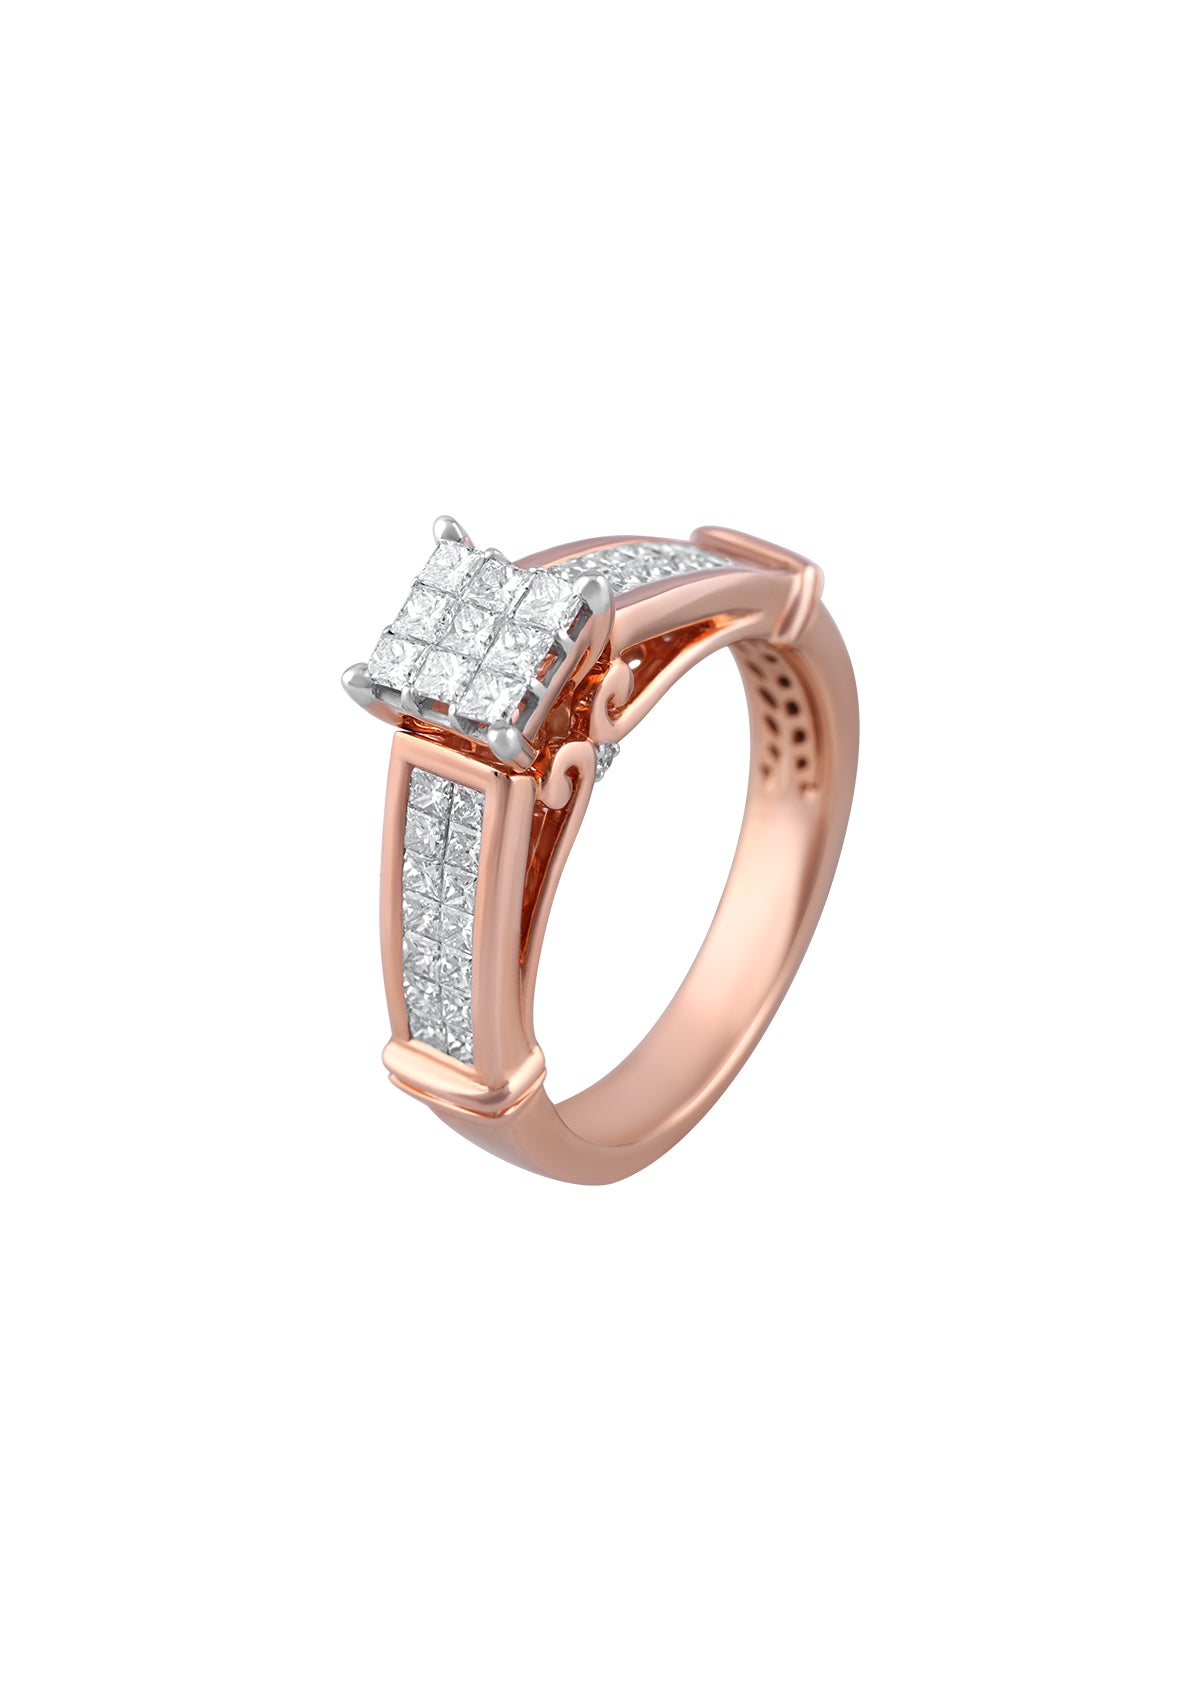 Cartier Love ring as wedding band - White gold or rose gold? :  r/EngagementRings